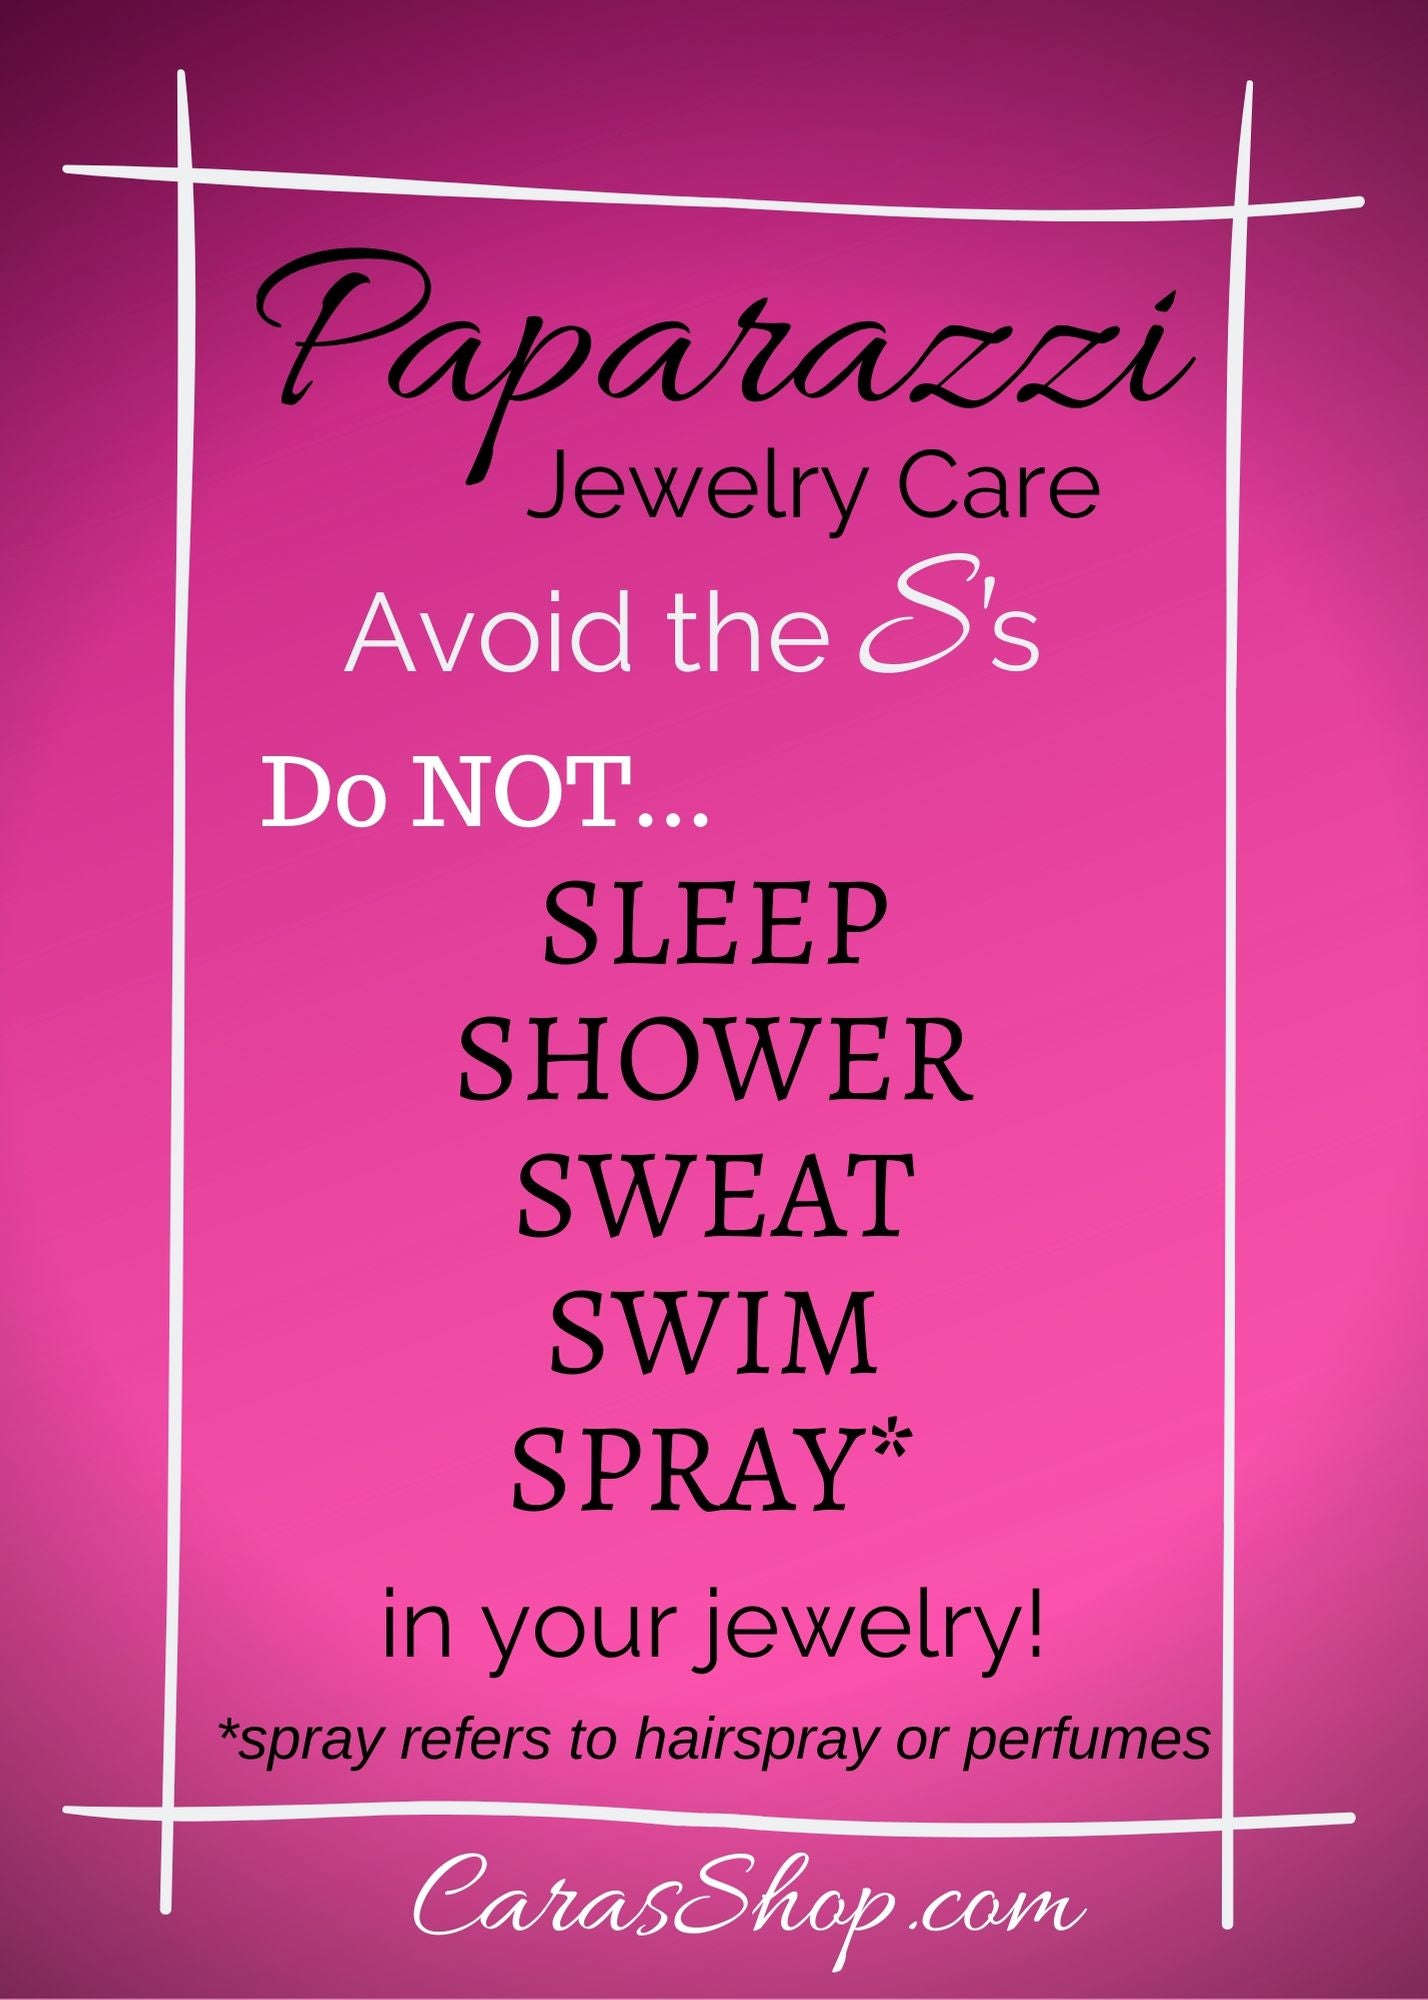 Paparazzi Accessories Jewelry Care Card - Avoid the S's - CarasShop.com